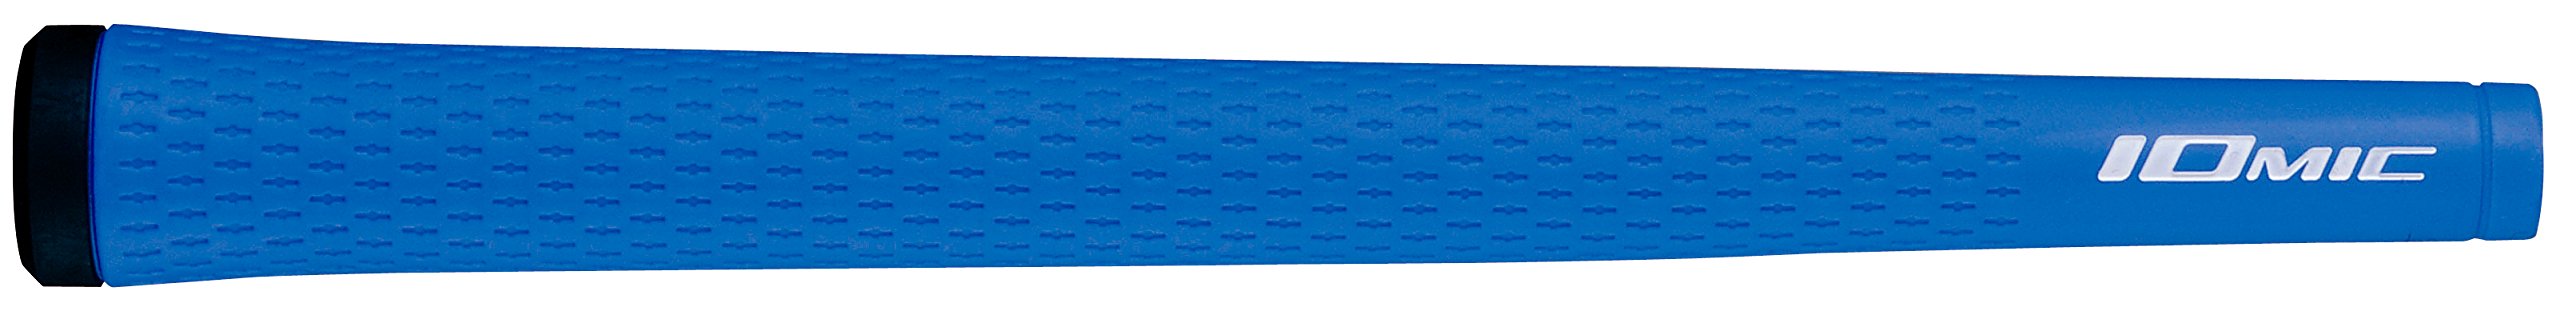 IOMIC Golf Grip Sticky MID Recycle Grip Series Blue/Black M60 Made in Japan NEW_1